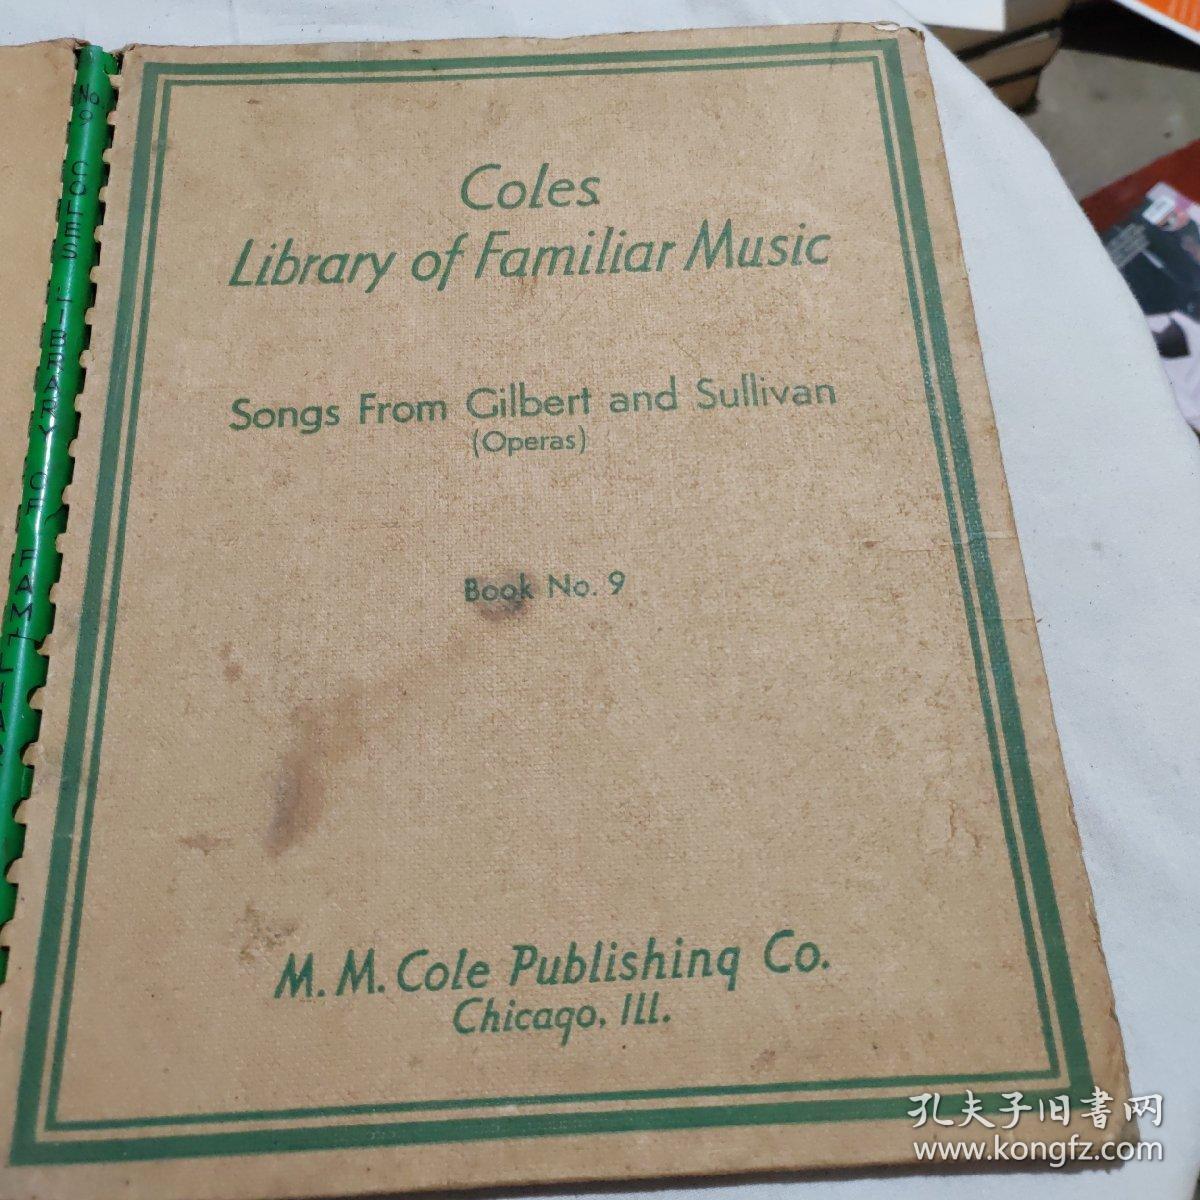 coles library of familiar music